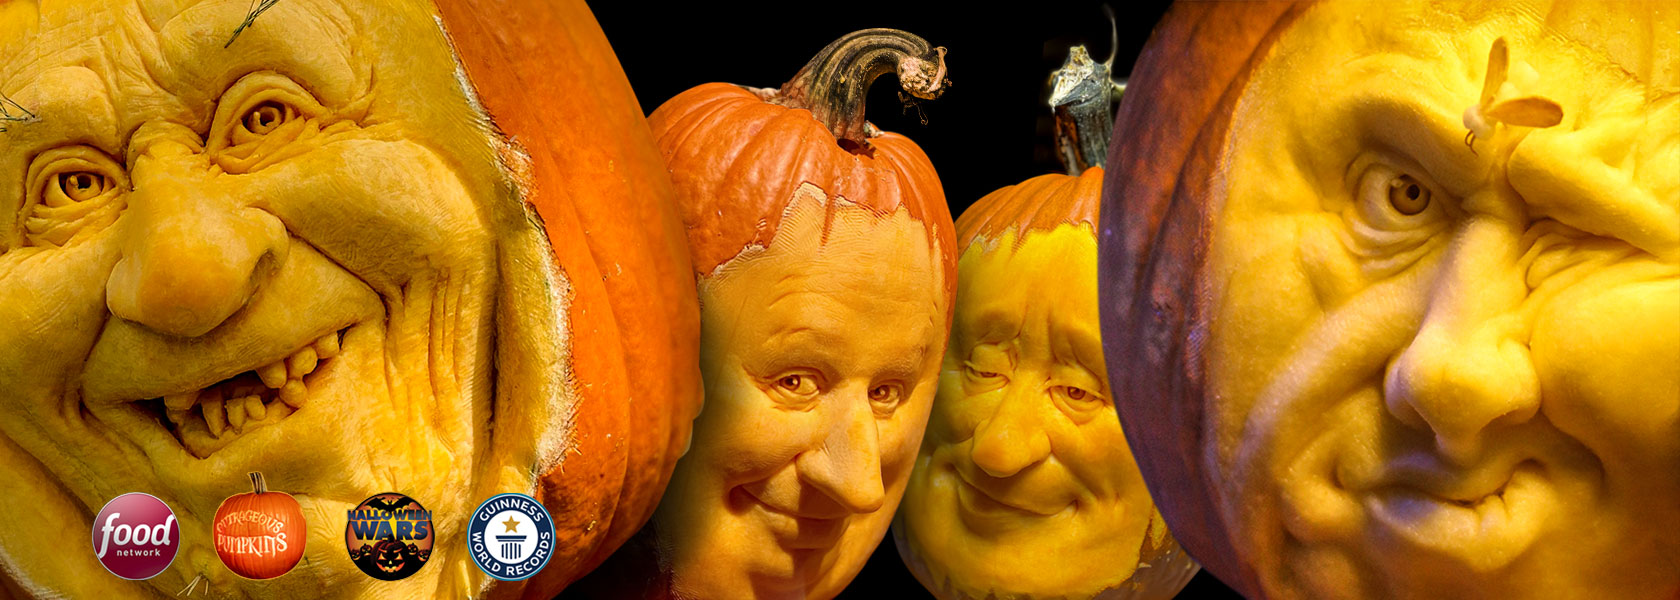 Lifelike faces carved into real pumpkins